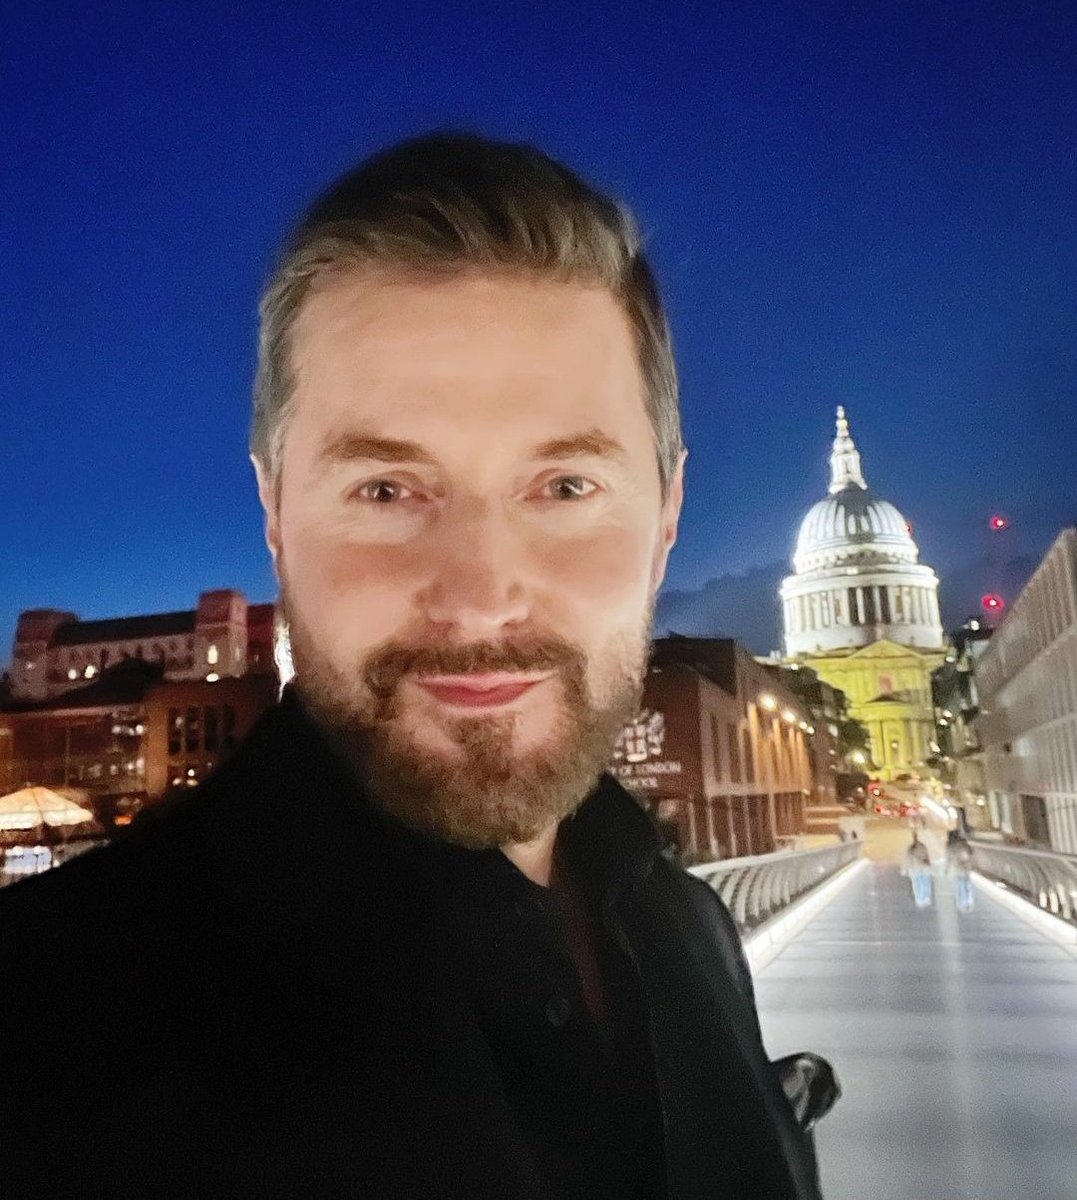 In London attending a gala to benefit the National Film and Television School (#NFTS), #RichardArmitage has gifted us with a photo from the event and a selfie he took on the way home. Looking sharp in that tux and the beard is coming in nicely. Swoon!